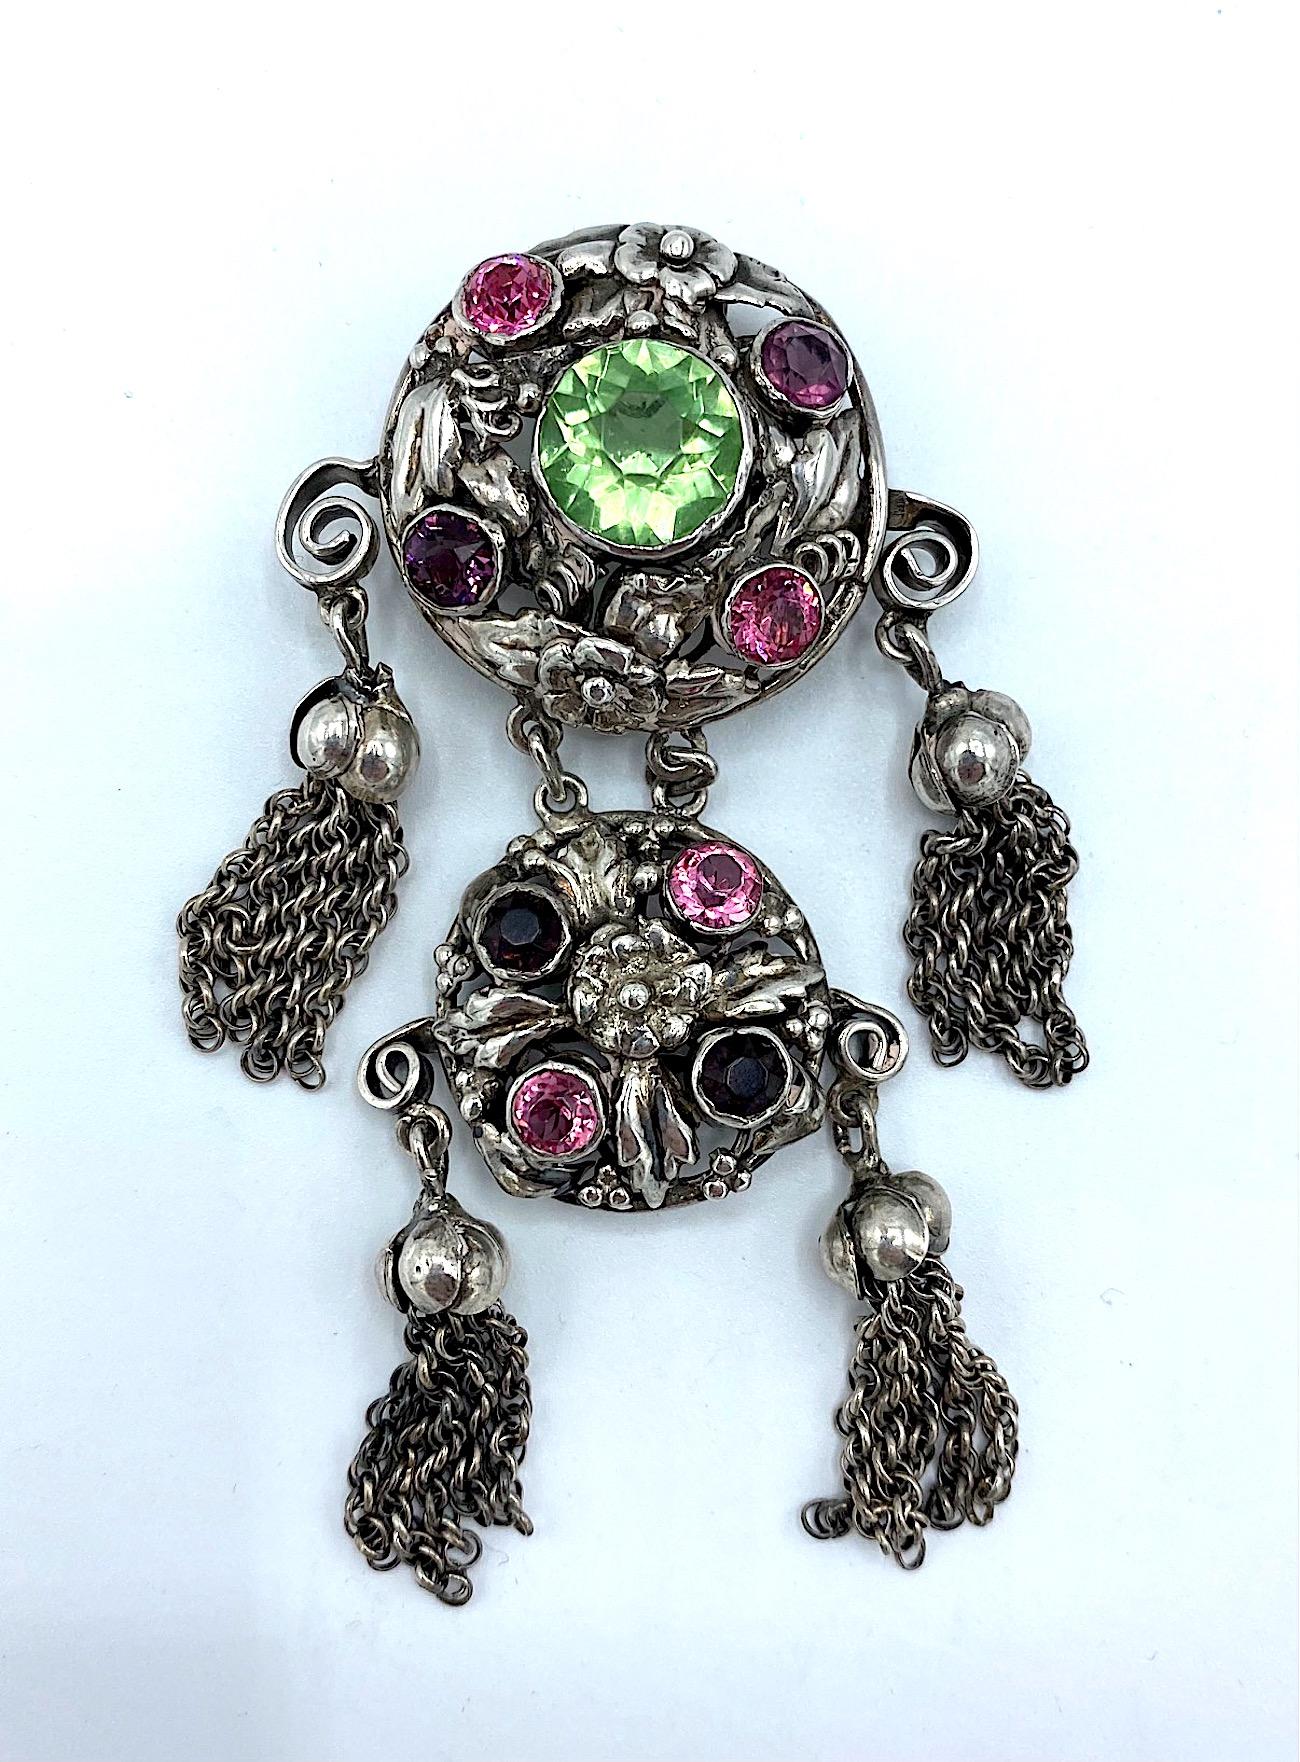 A stunning and intricate brooch by jewelry company Hobe' made between 1941 and 1948. It features two round disks of intricately hand made leaves and flowers within a round framework. The disks are set with pink, purple and green faceted crystal